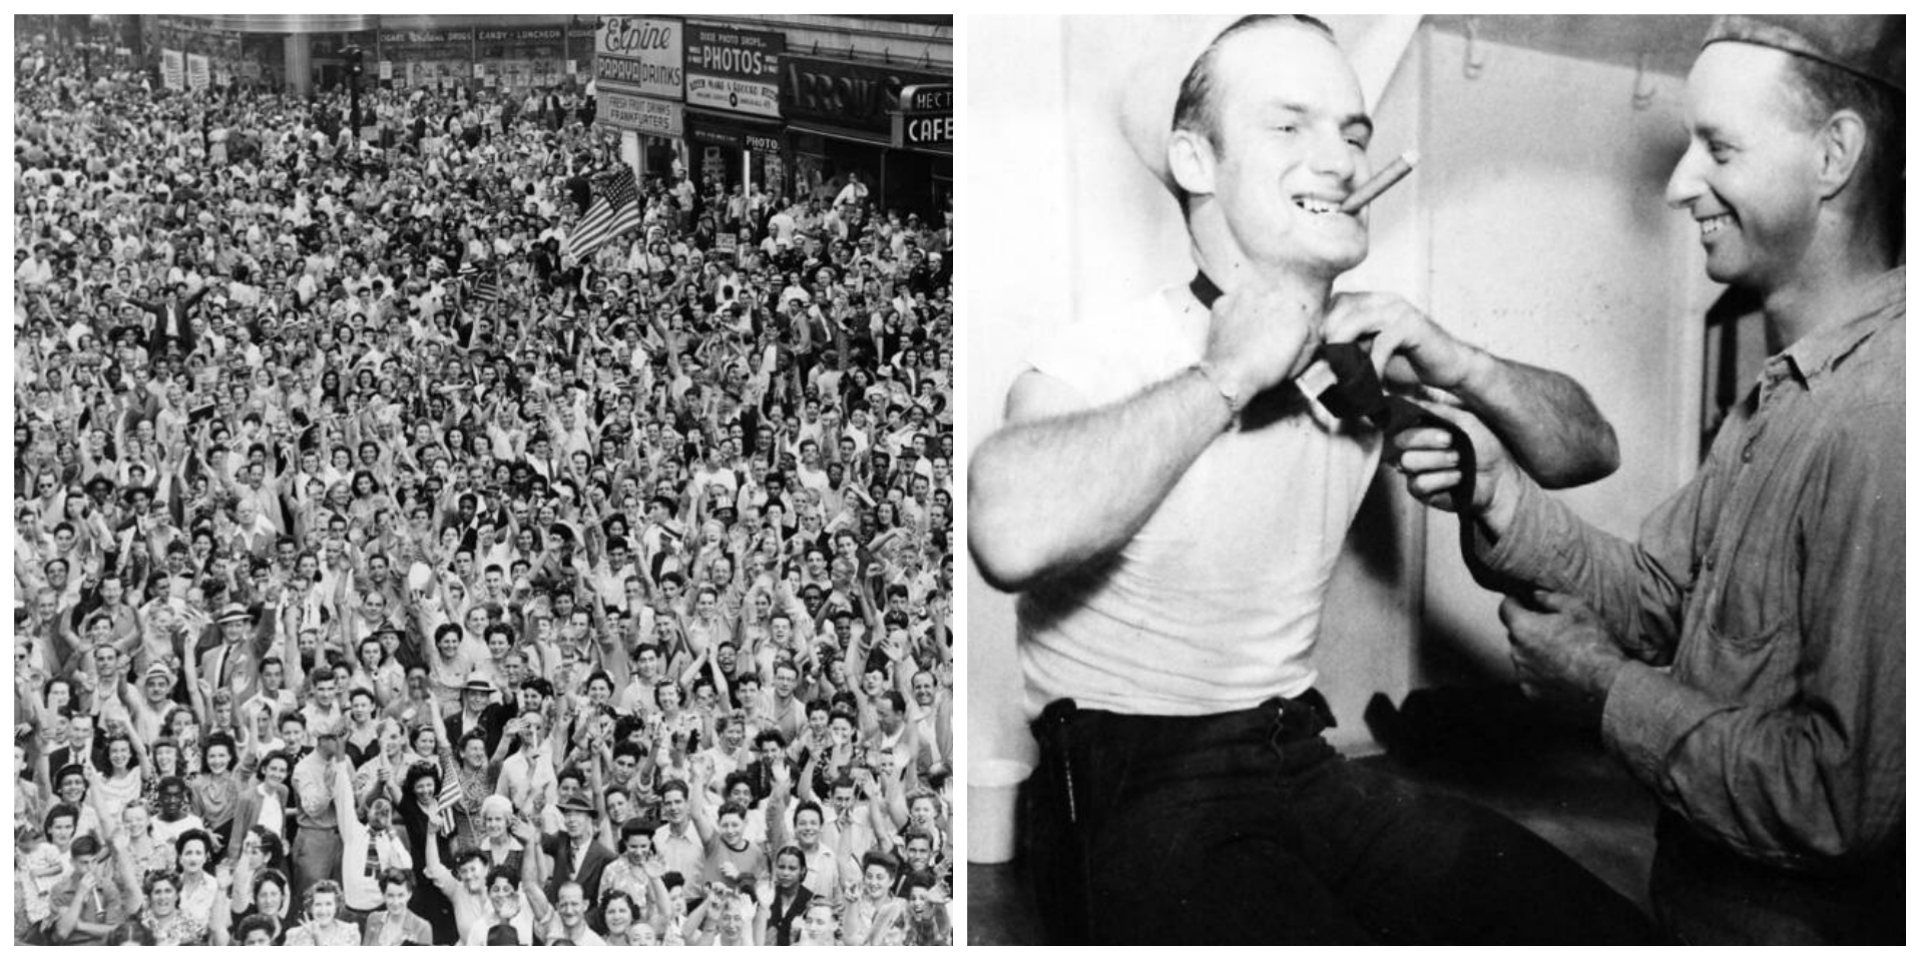 An Inside Look At V-J Day And The End Of World War 2, From The Joyous To The Ugly